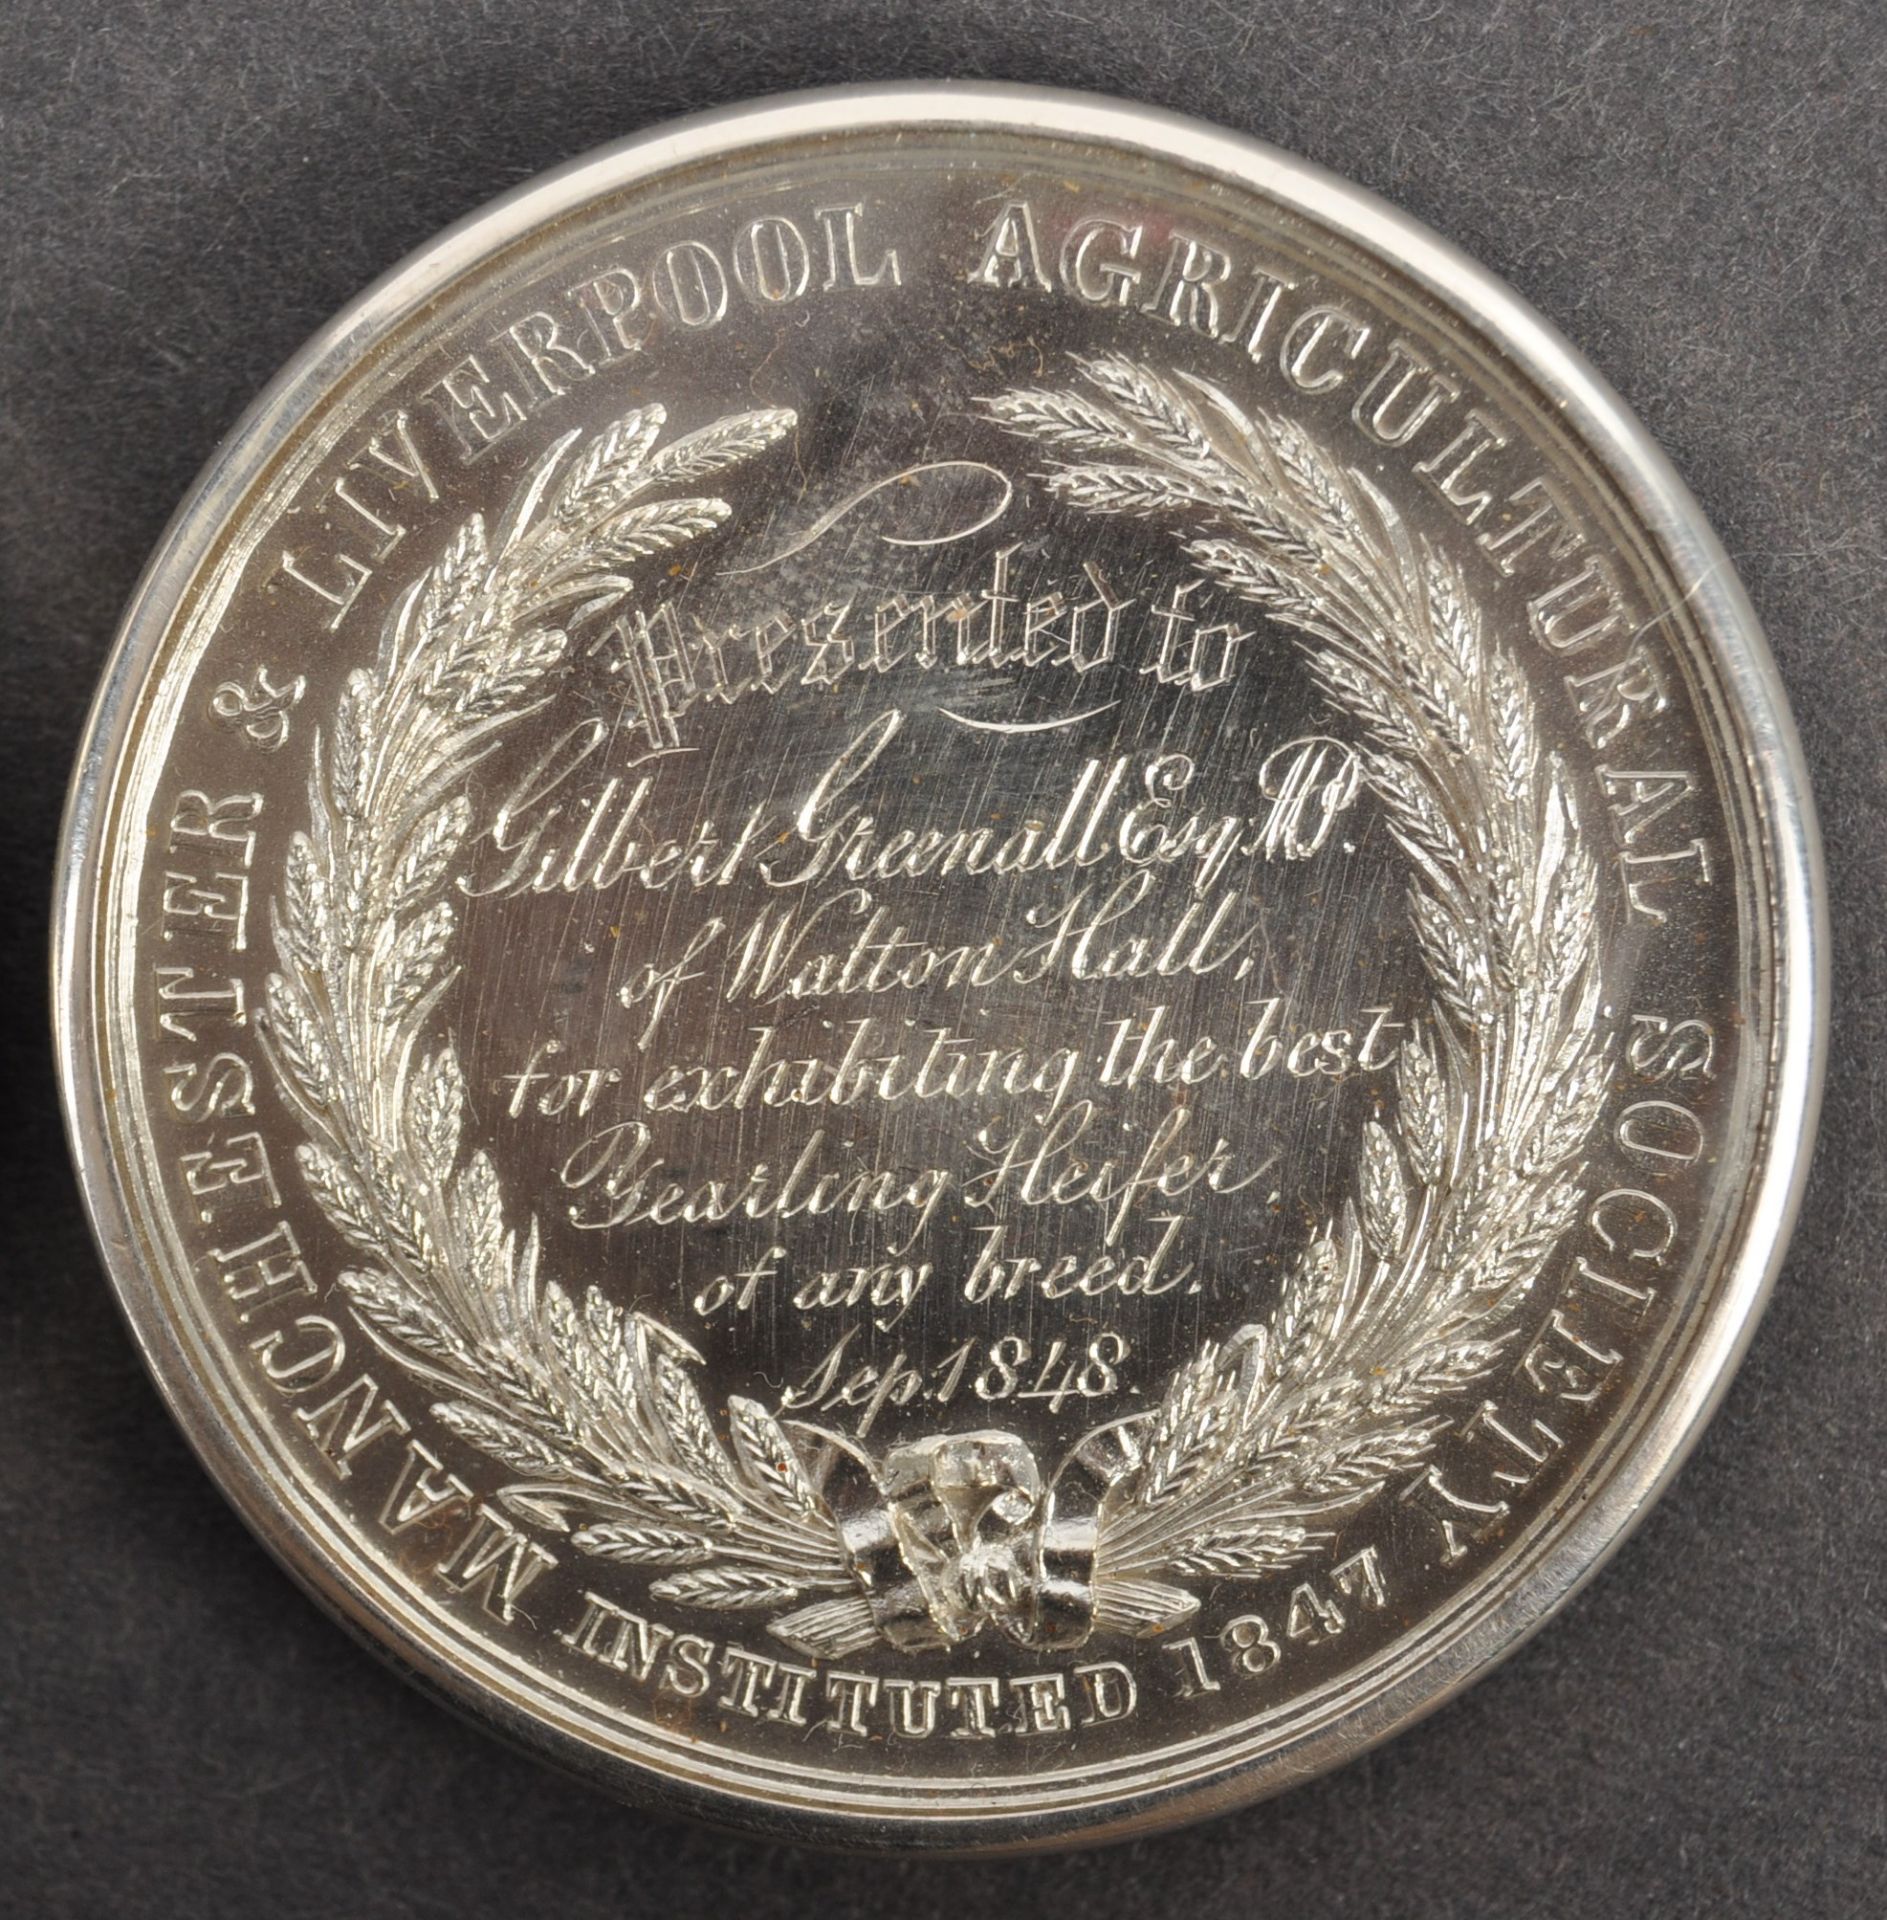 COLLECTION OF ANTIQUE MEDALLIONS - LIVERPOOL AGRICULTURAL SOCIETY - Image 3 of 4